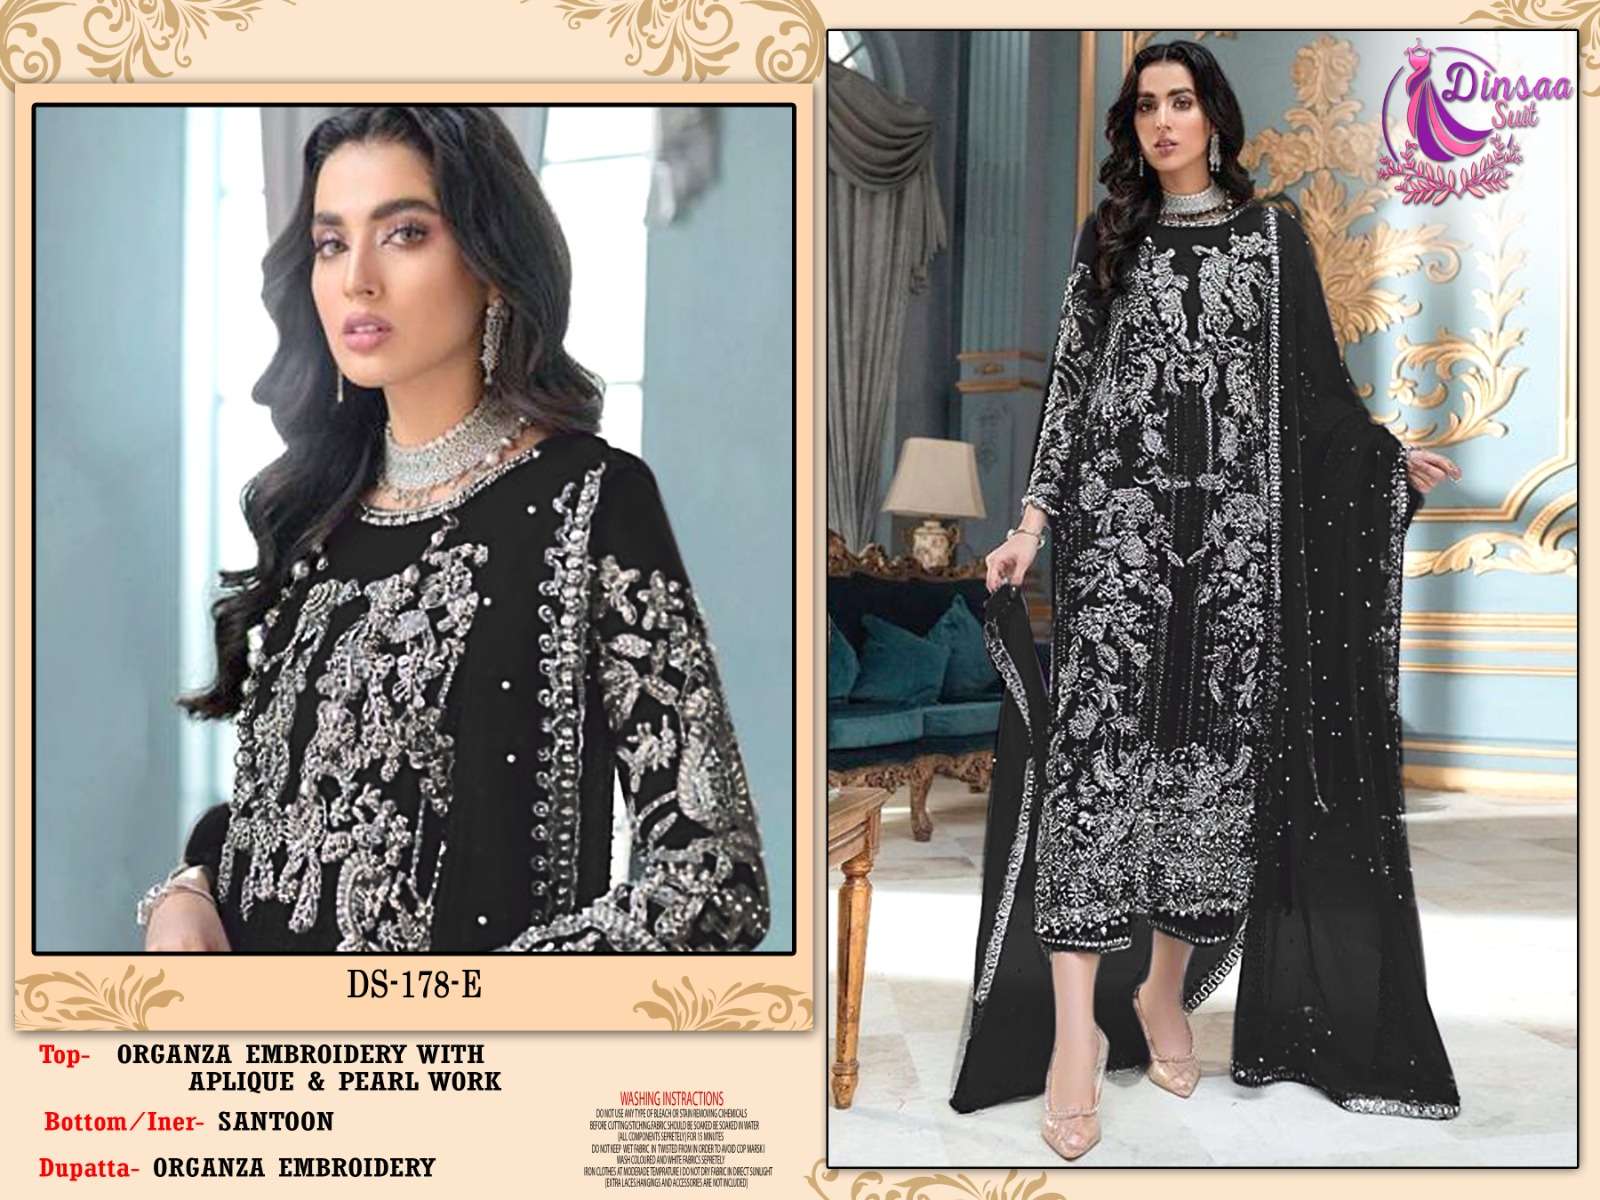 DINSAA SUIT D NO.178 DESIGNER ORGANZA EMBROIDERY WORK WITH PEARL WORK PAKISTANI REPLICA SUITS WHOLESALE 